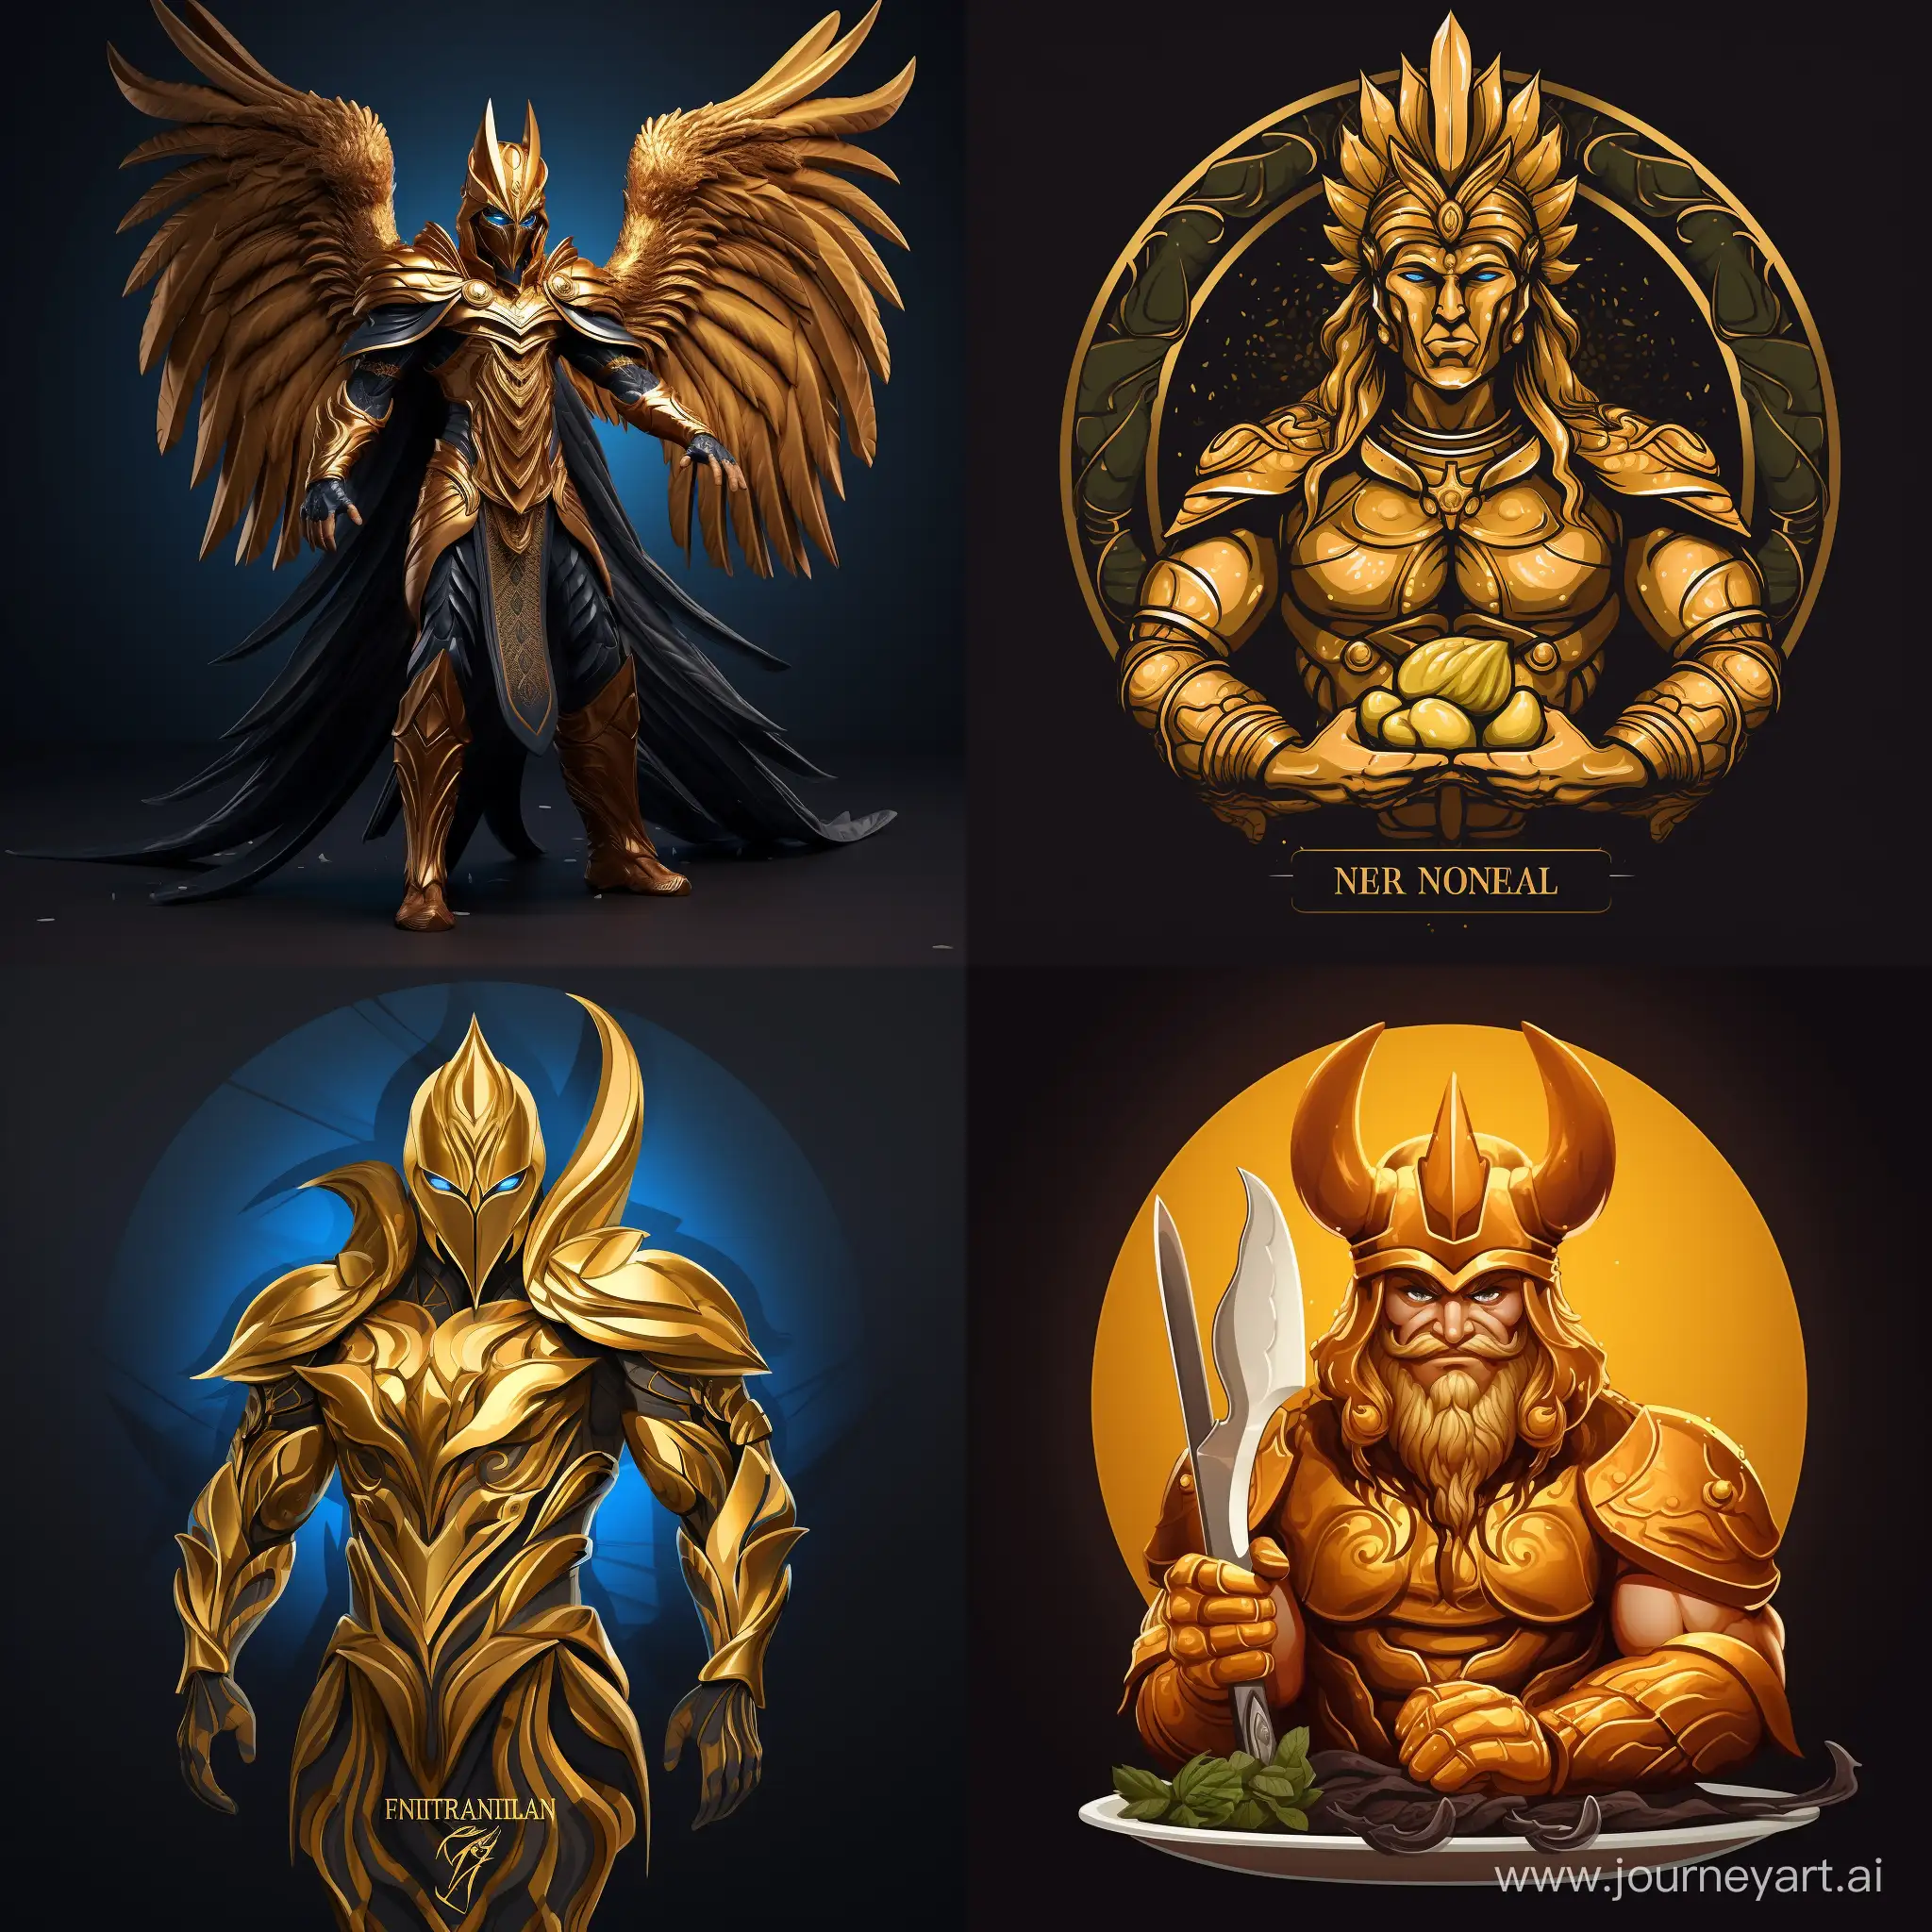 Nordic-GodInspired-Mascot-in-Golden-Armor-for-Fitness-Meal-Company